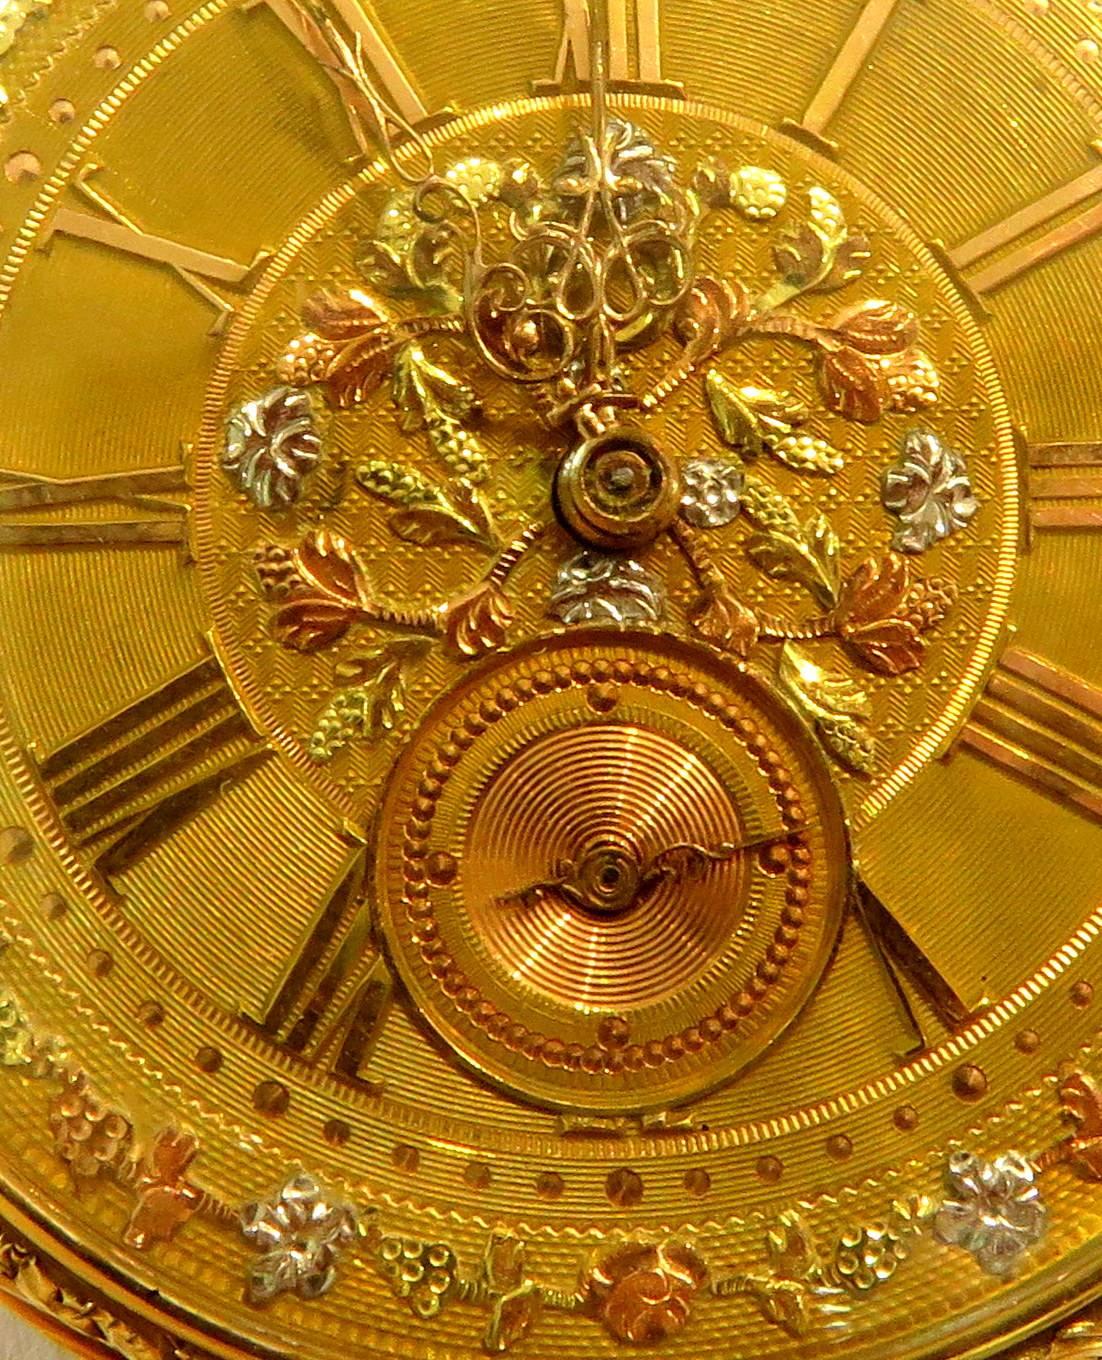 This pocket watch would make the most elegant pendant or charm!. This French pocket watch is all 18k, even the face with the hand applied flowers in rose, white, and yellow gold. It has the original key and is able to wind and change the time, but